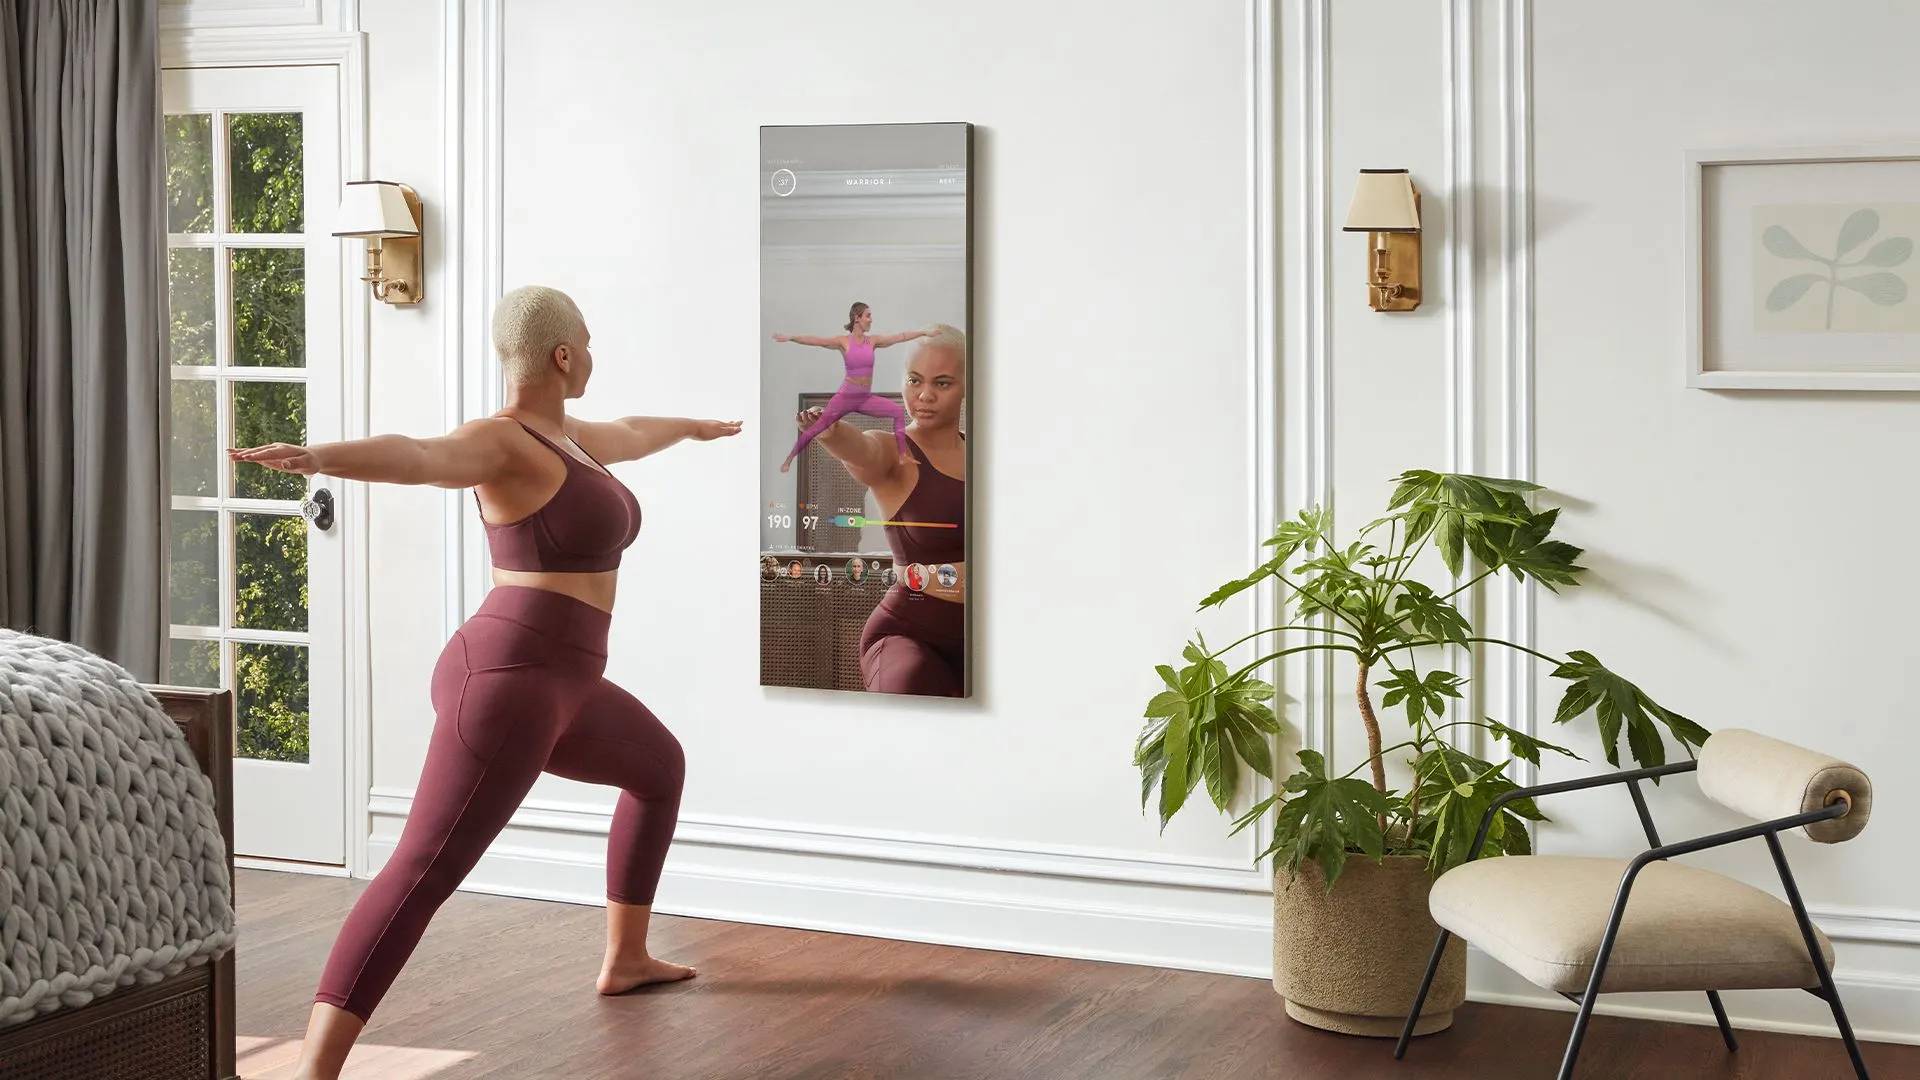 Lululemon Studio Mirror blends workout tech in the home